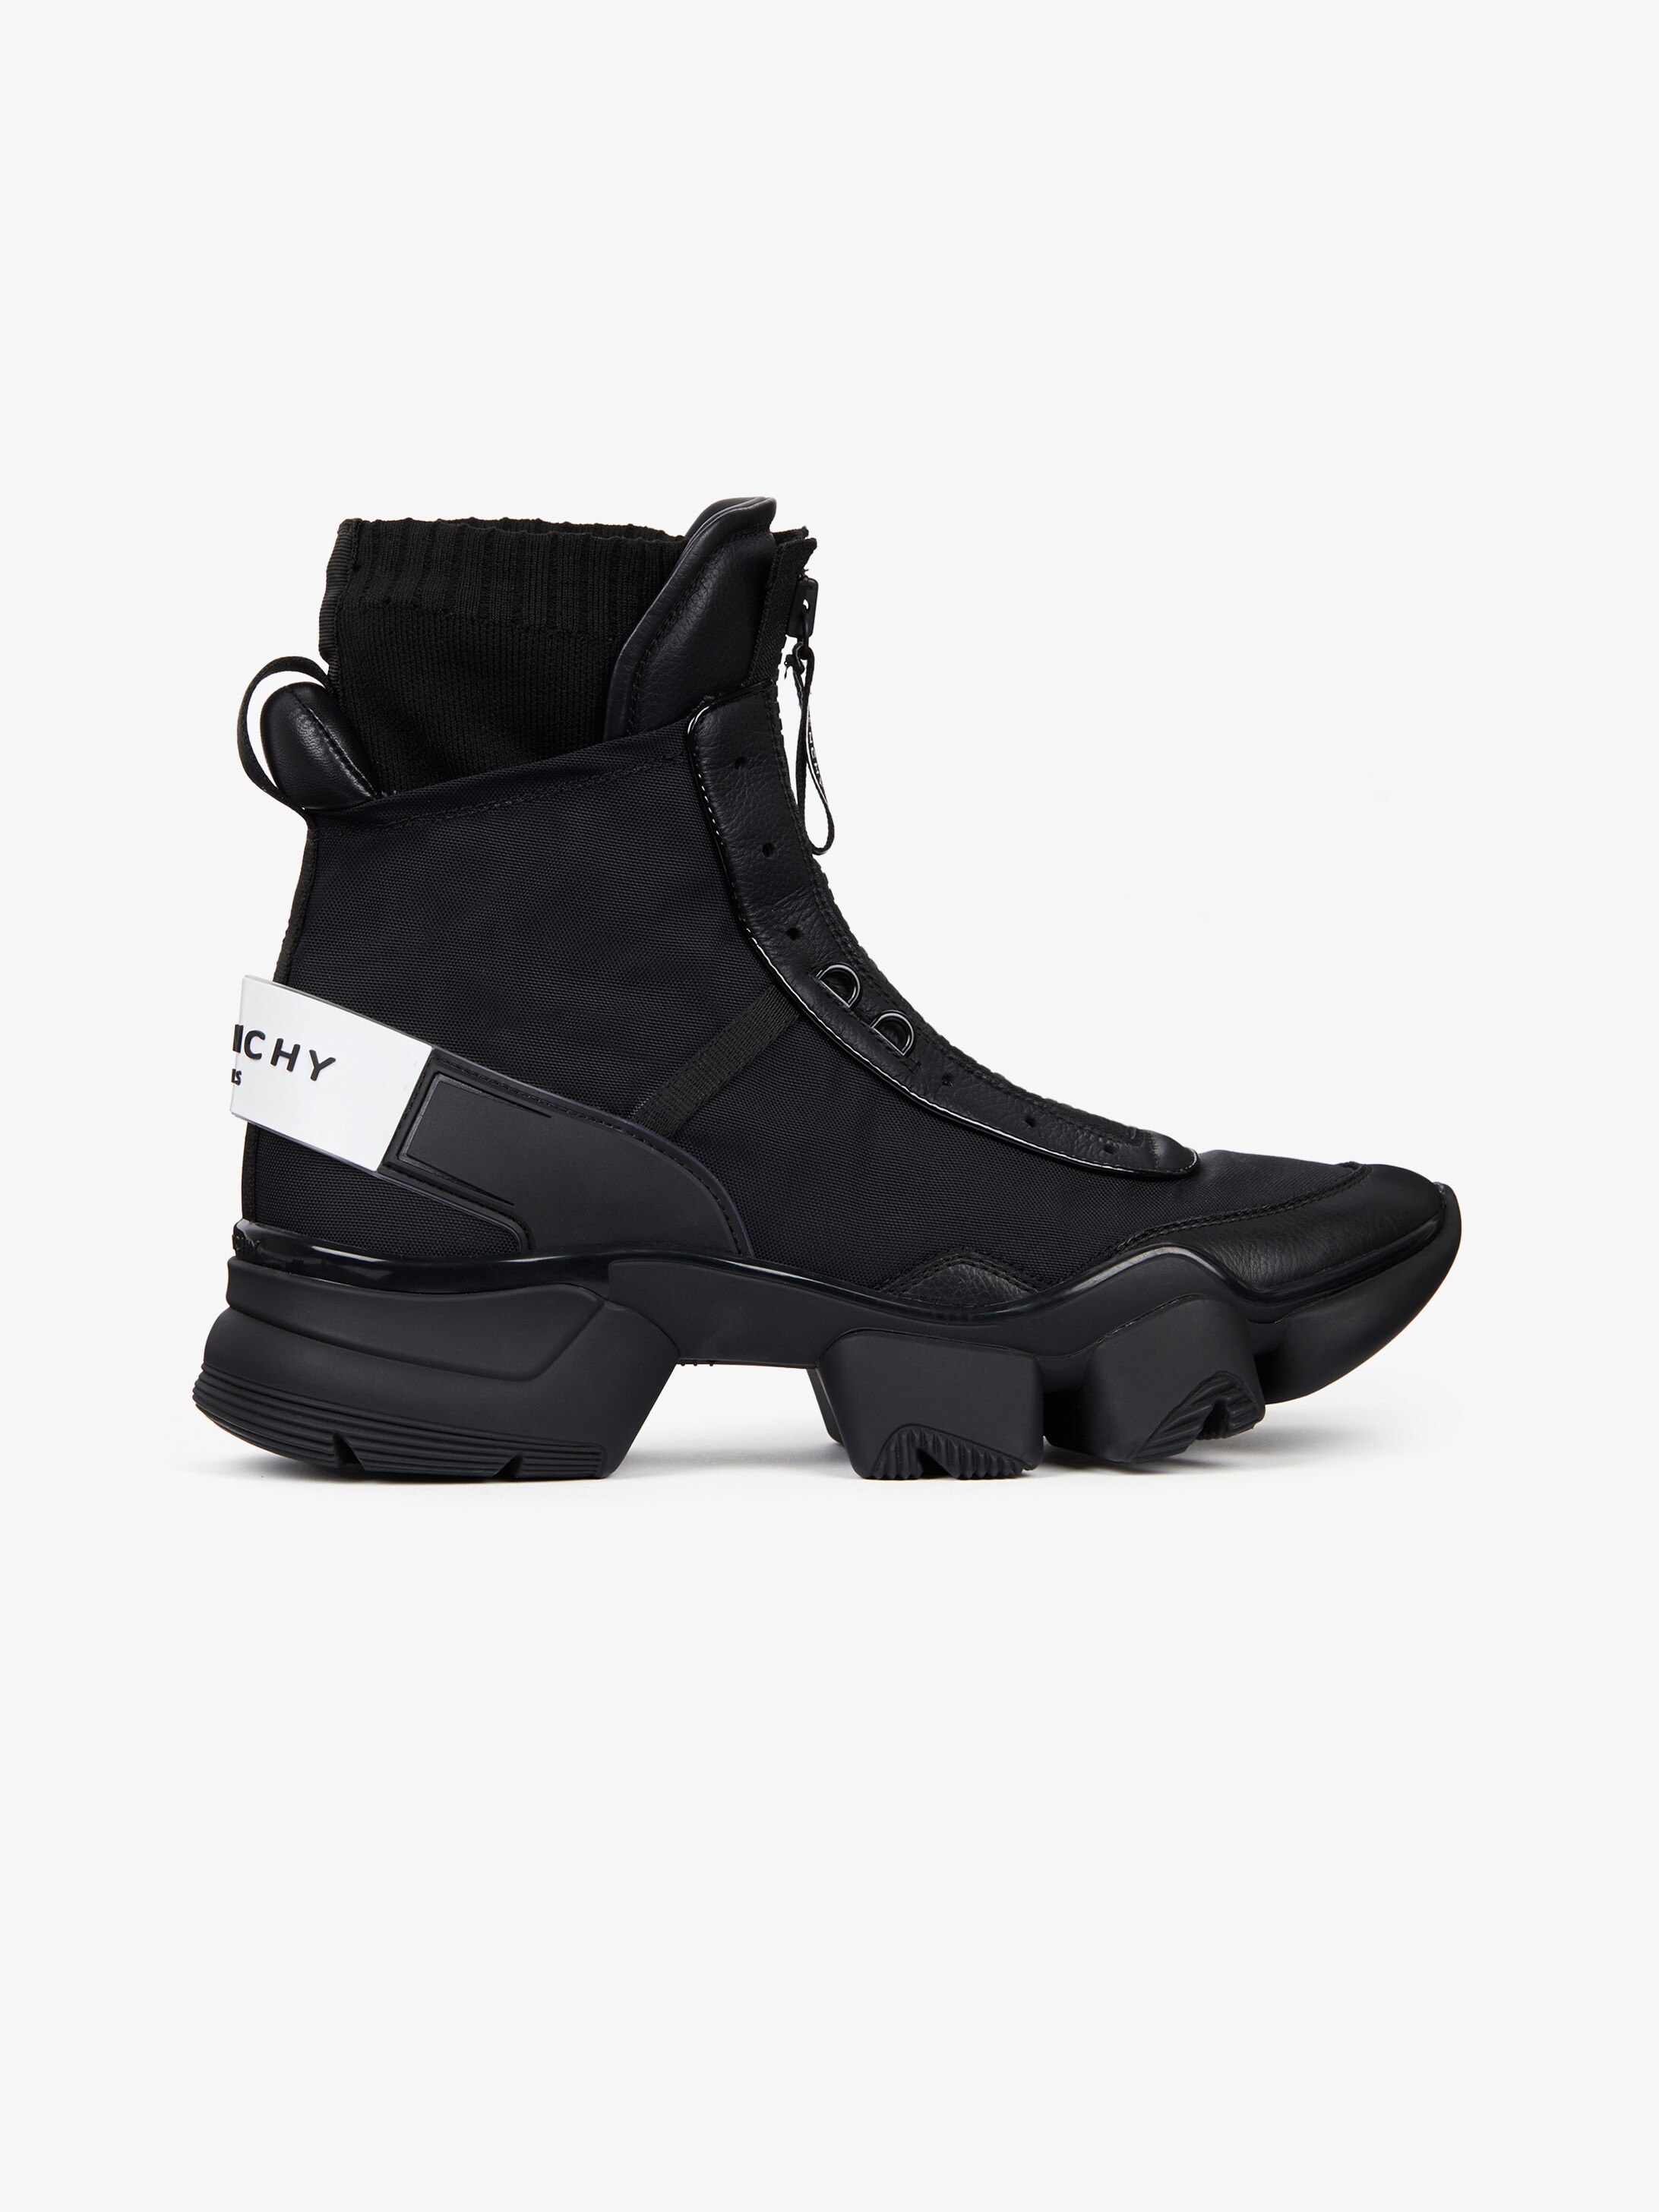 givenchy sneakers high top